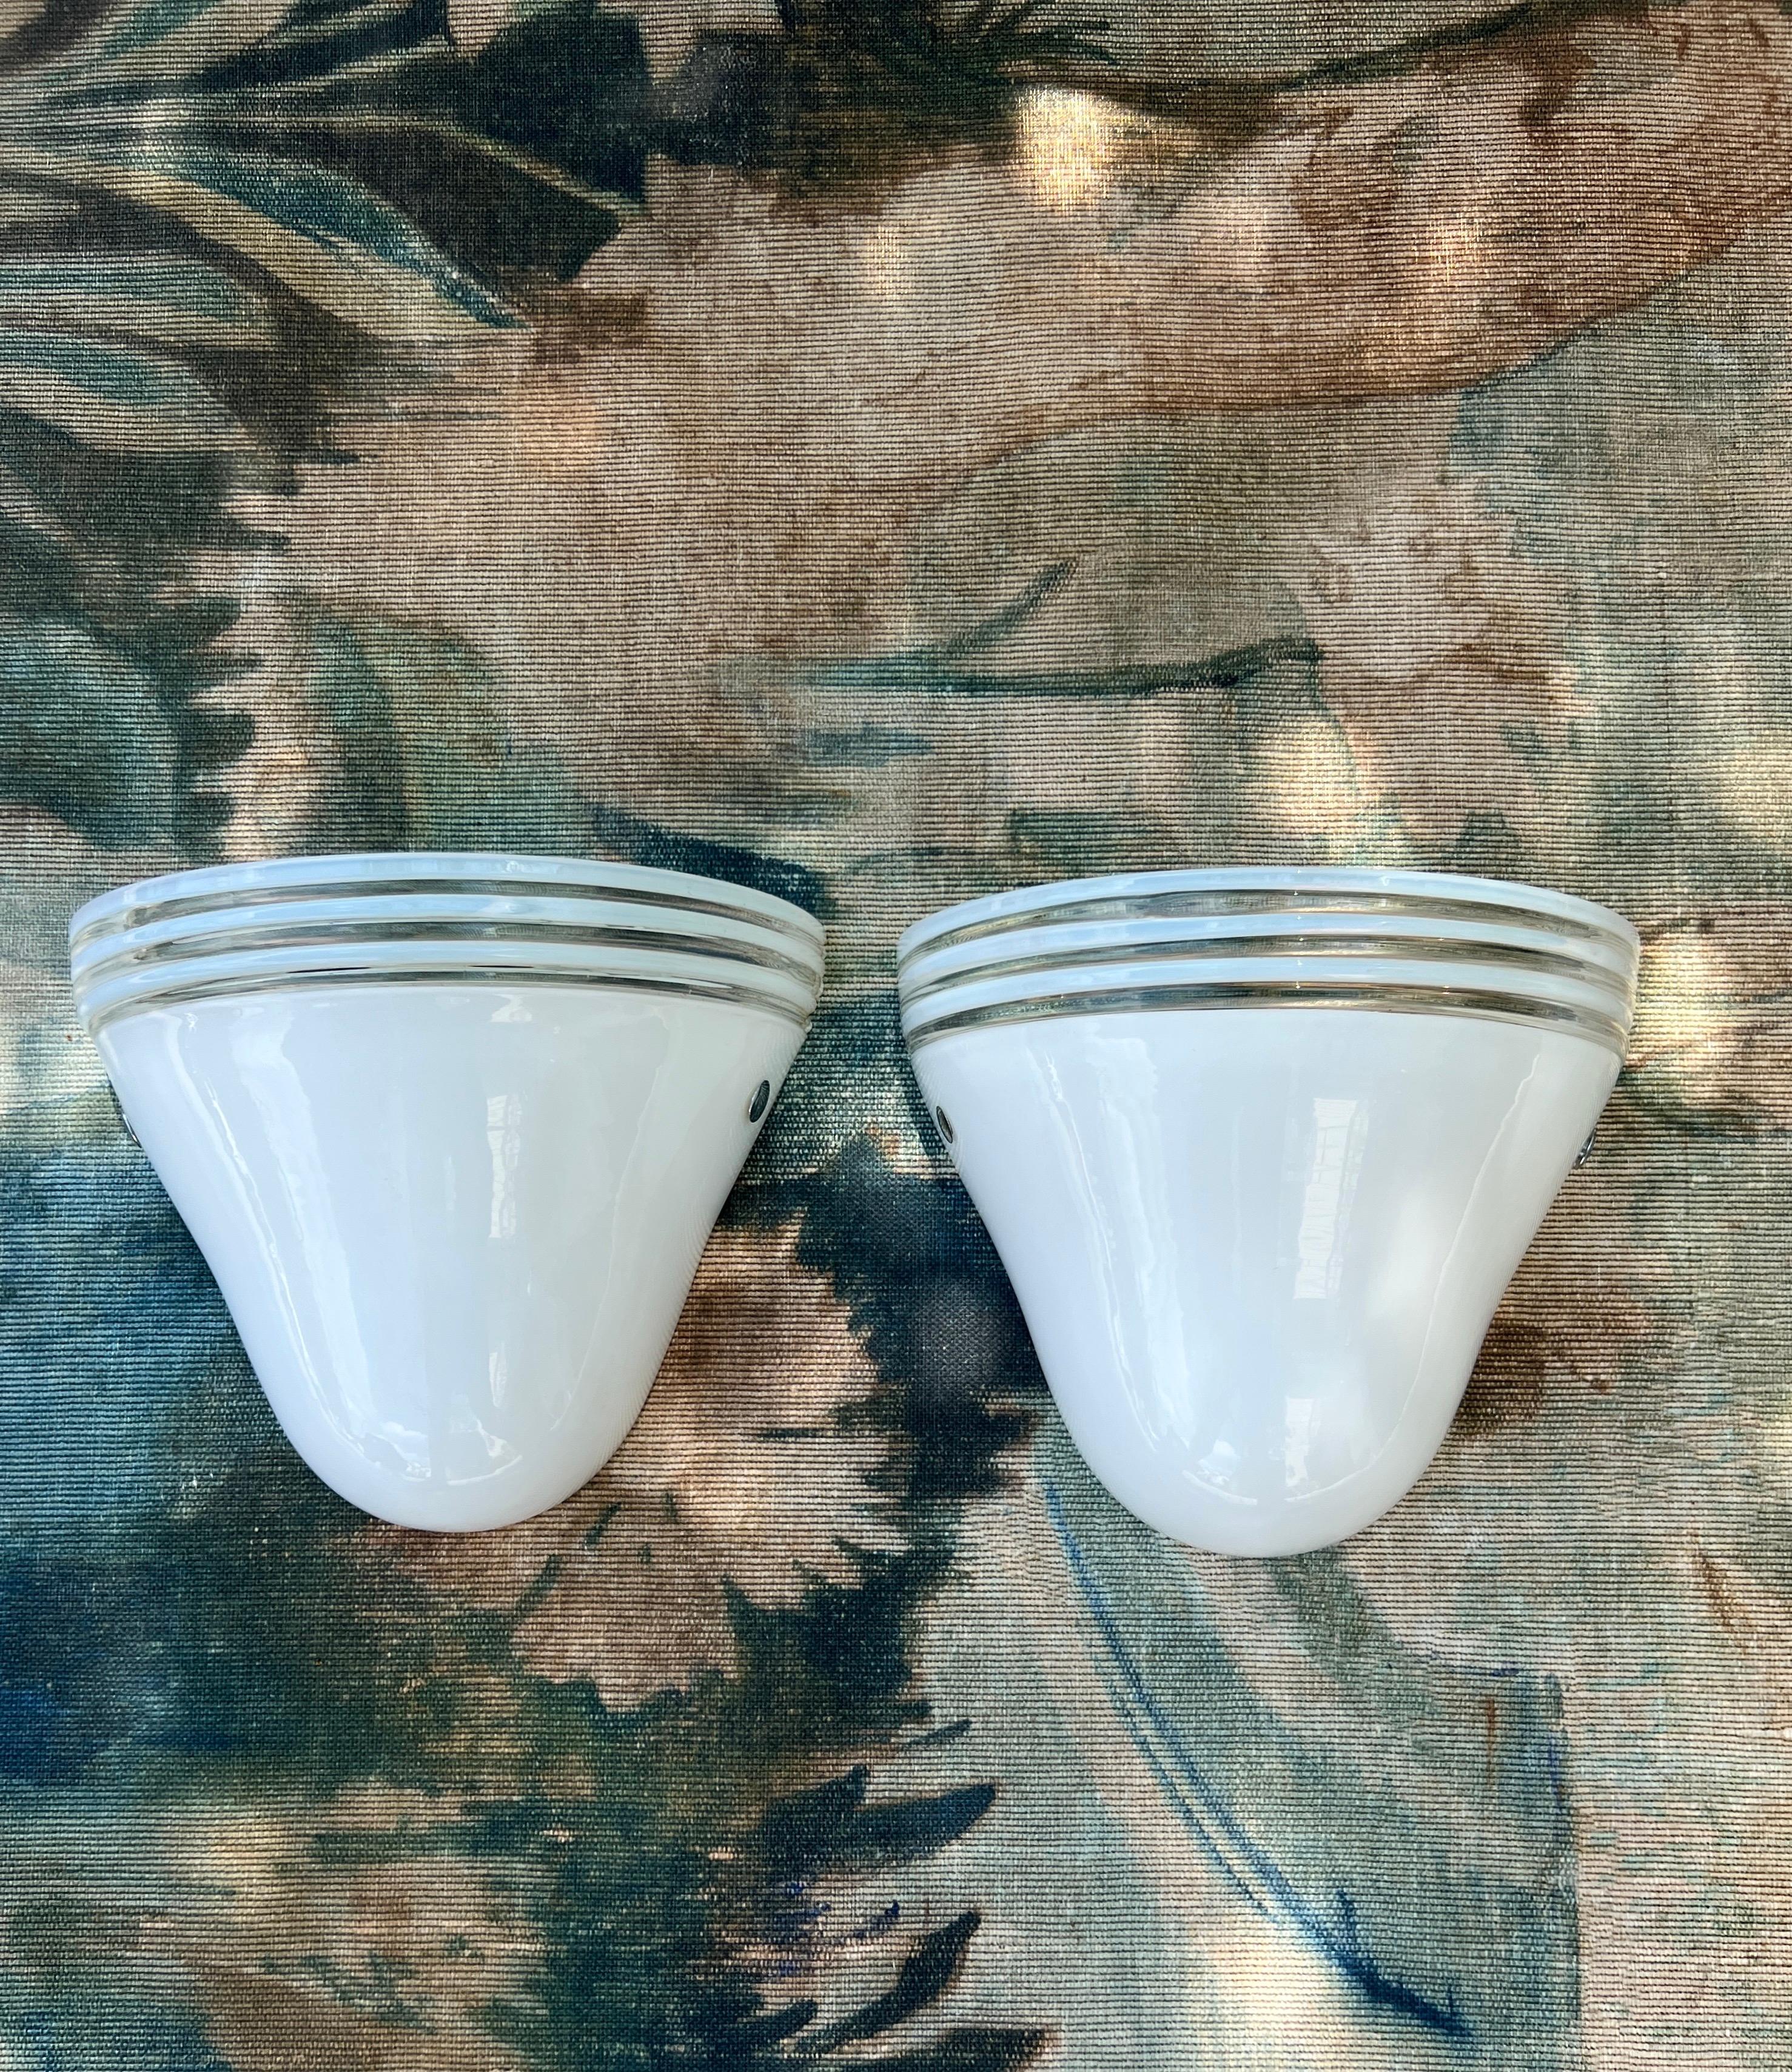 Pair of Mid-Century Modern White Murano Glass Sconces by Leucos, c. 1970s For Sale 1